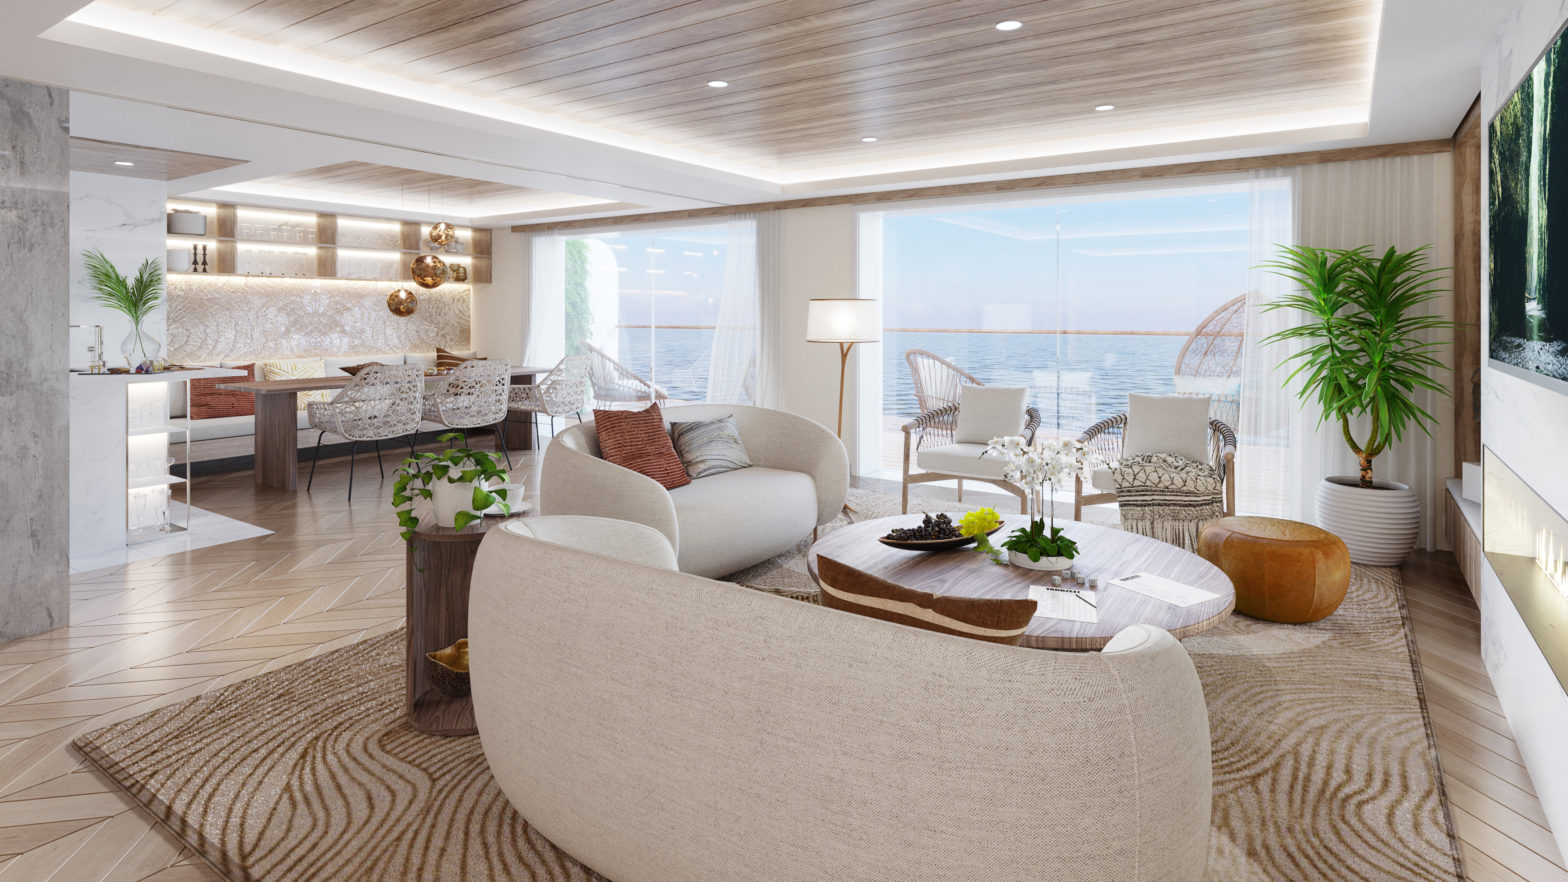 Travel The World Full-Time In This Luxury Condo On The Water